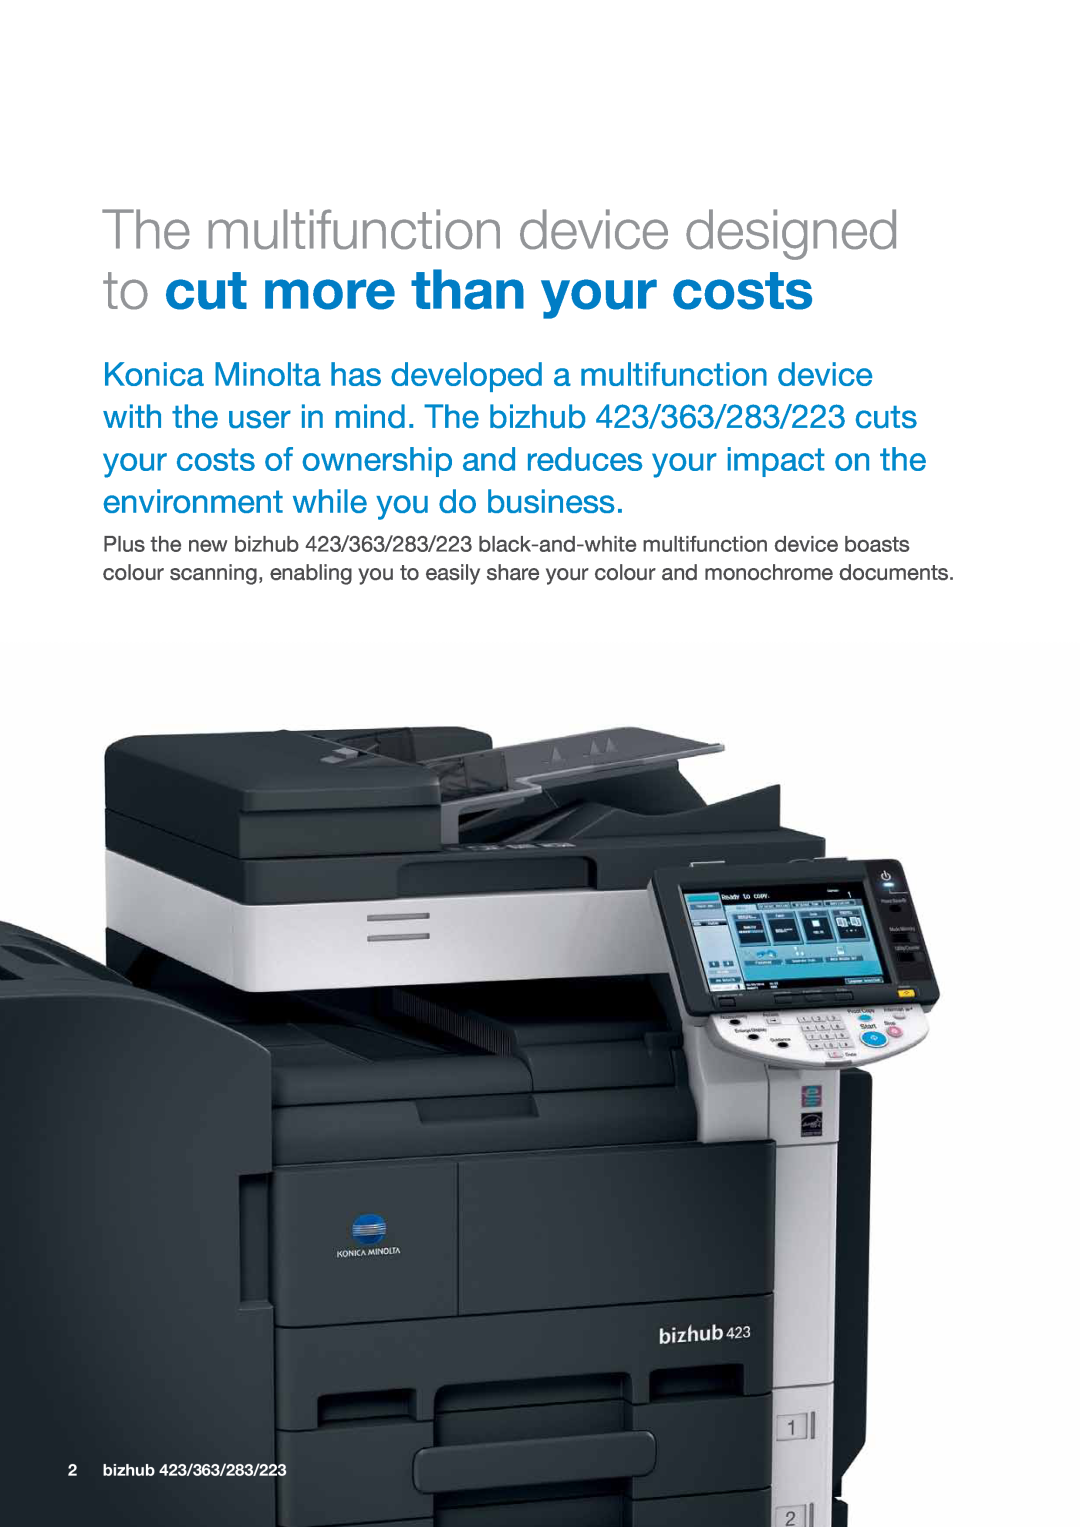 Konica Minolta 363, 283, 223, 423 manual The multifunction device designed, to cut more than your costs 